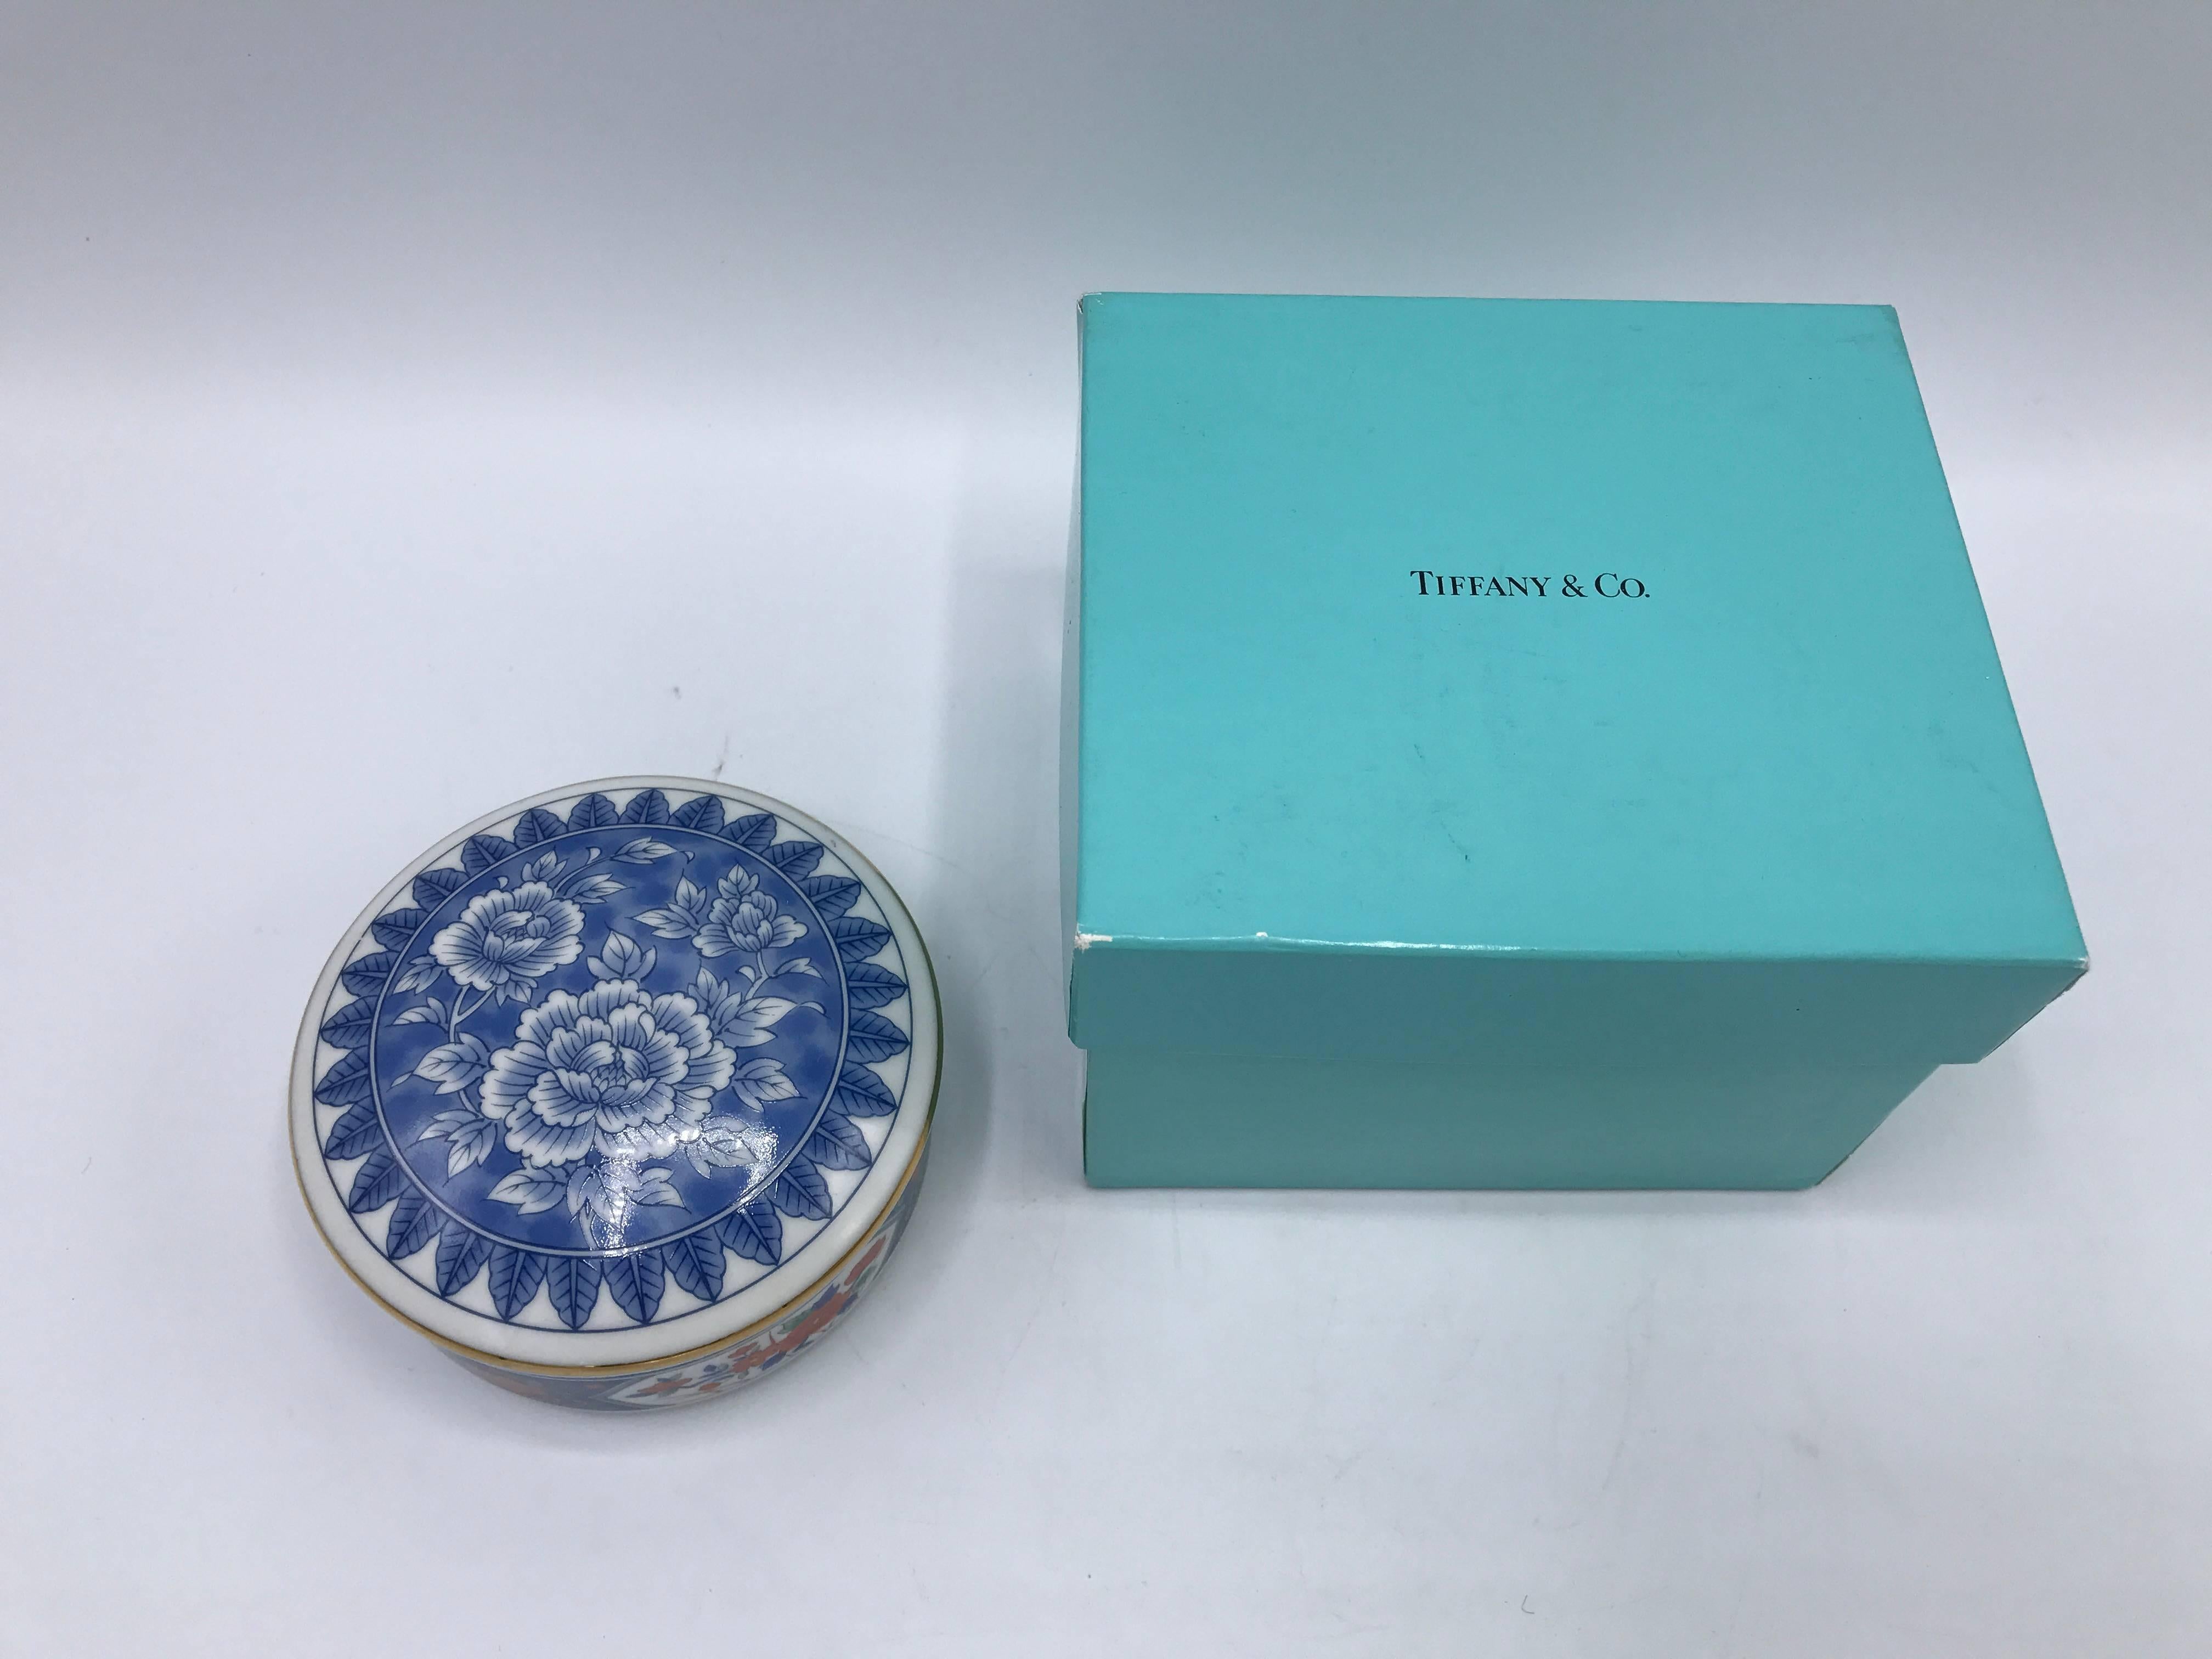 1980s Tiffany & Co. Blue and White Chinoiserie Lidded Bowl with Gold Border 1